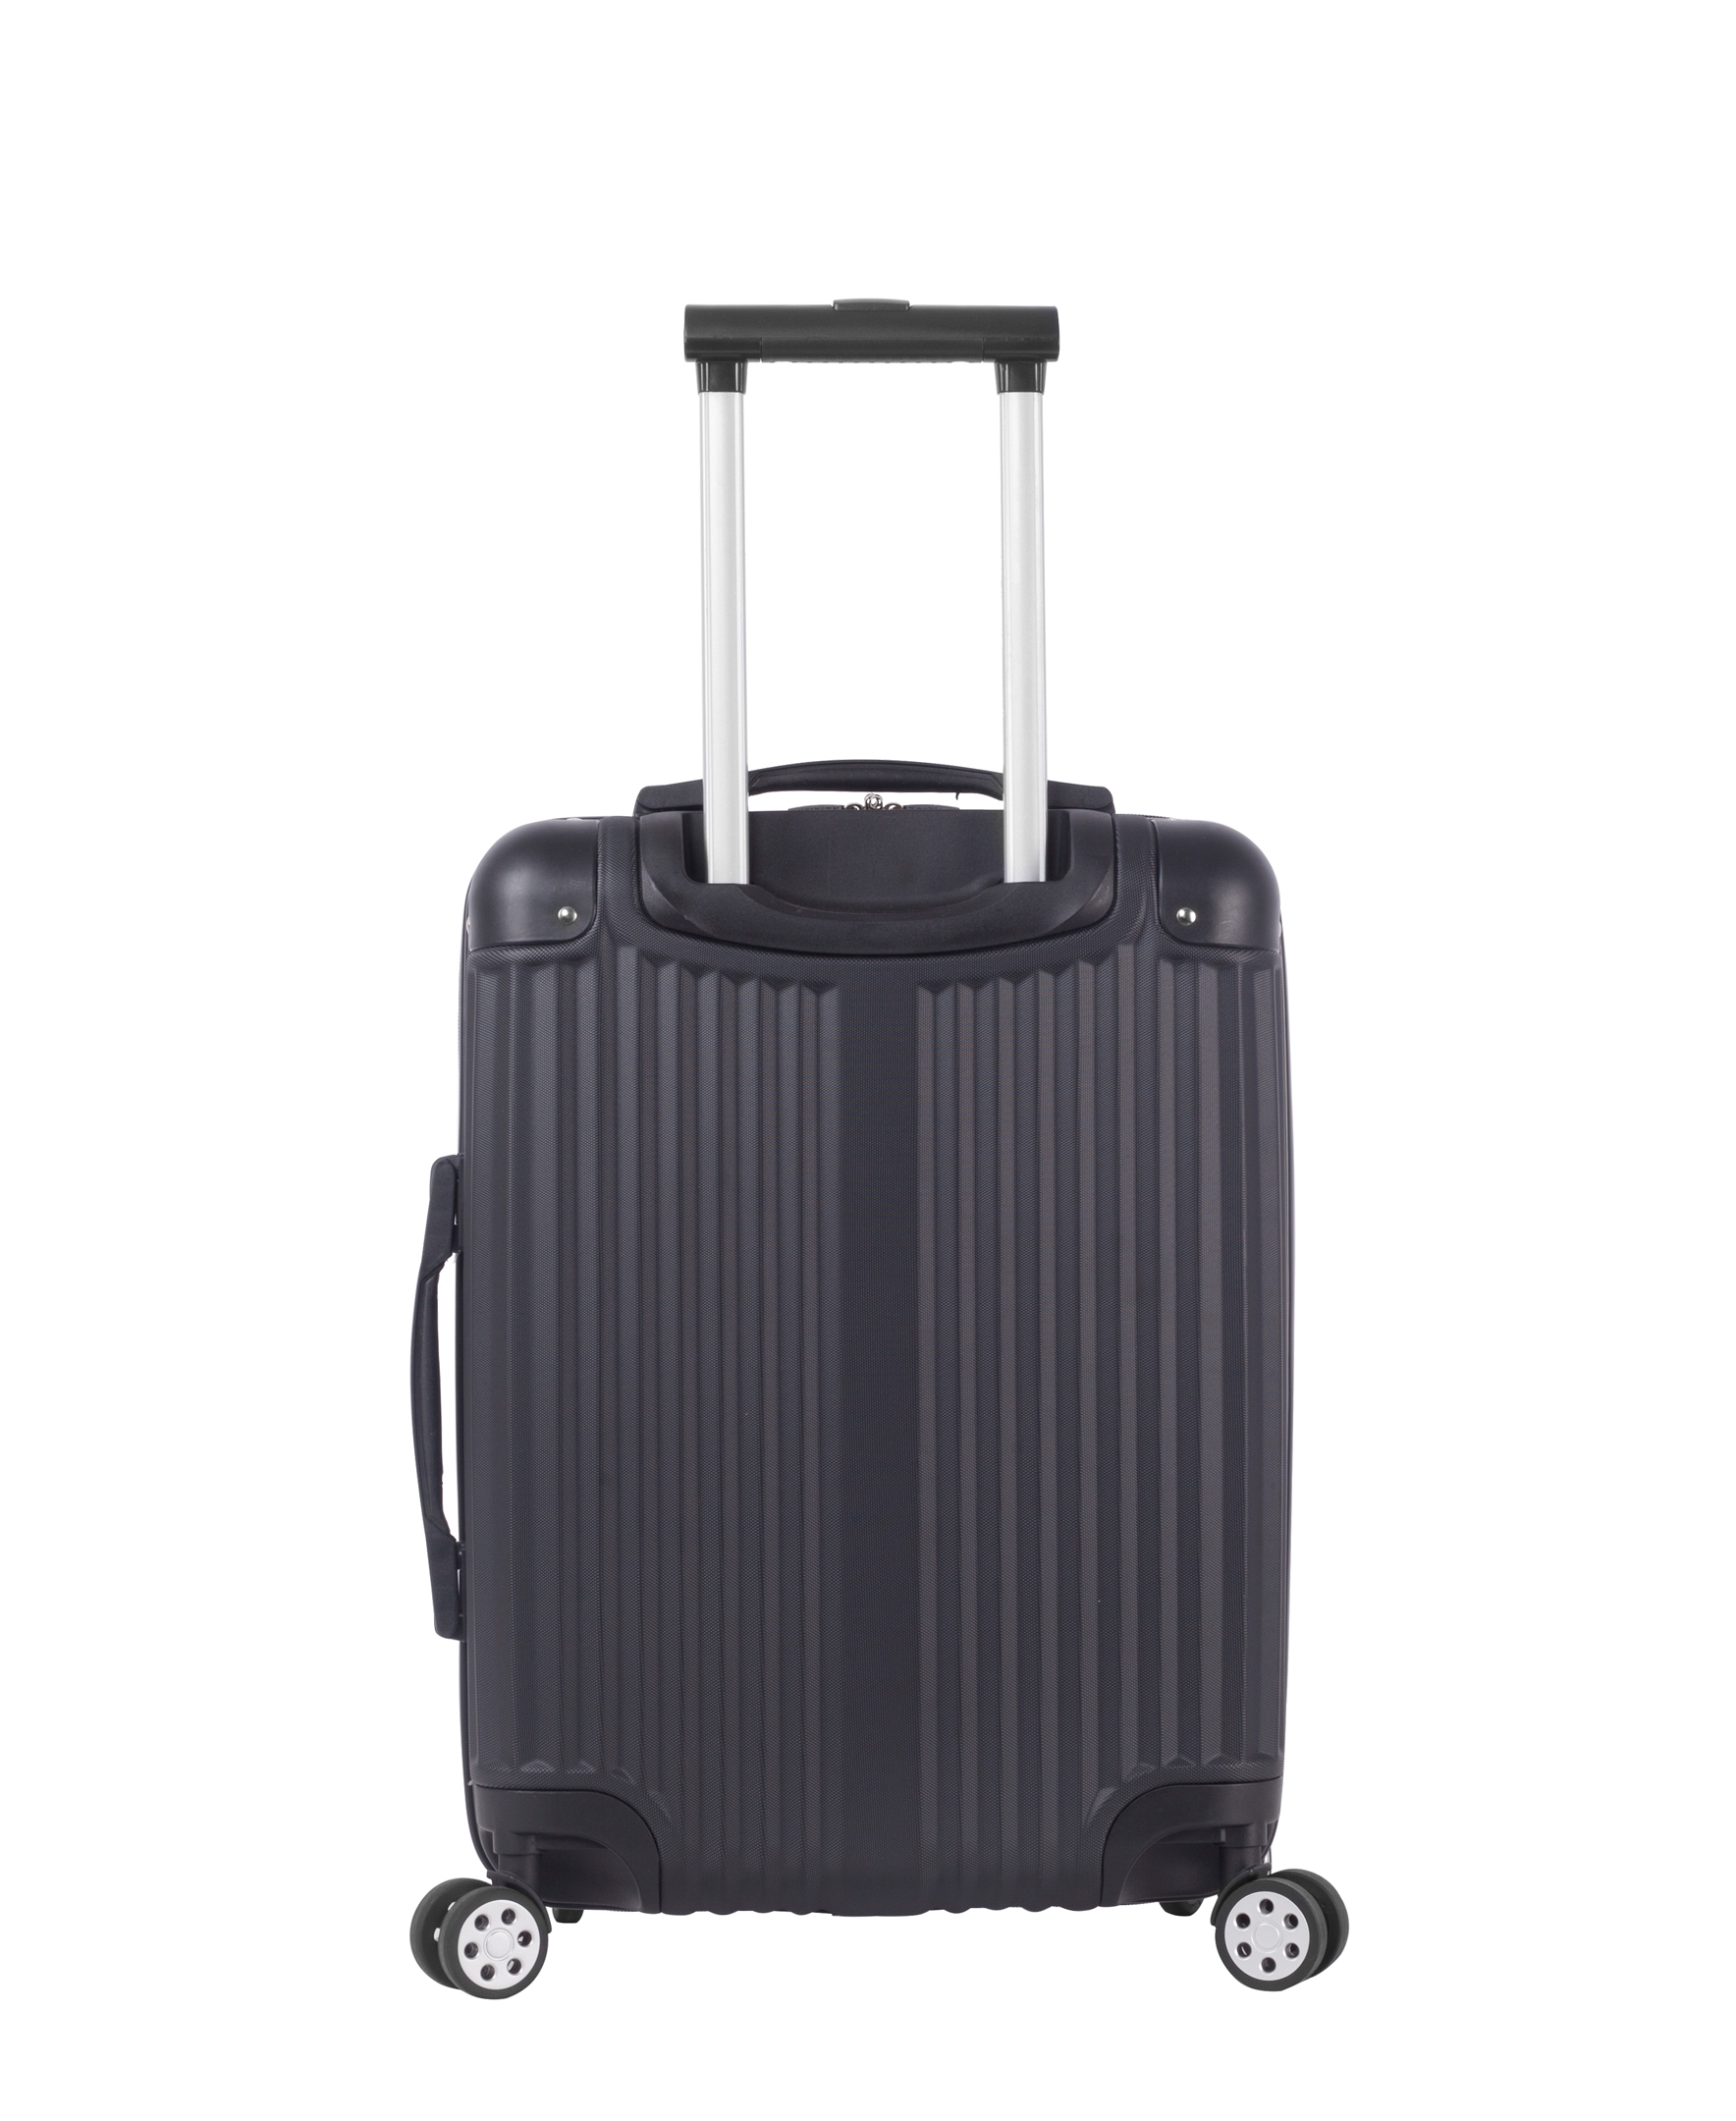 Rockland Luggage Berlin 3 Piece ABS Non-Expandable Luggage Set, Black - image 2 of 9